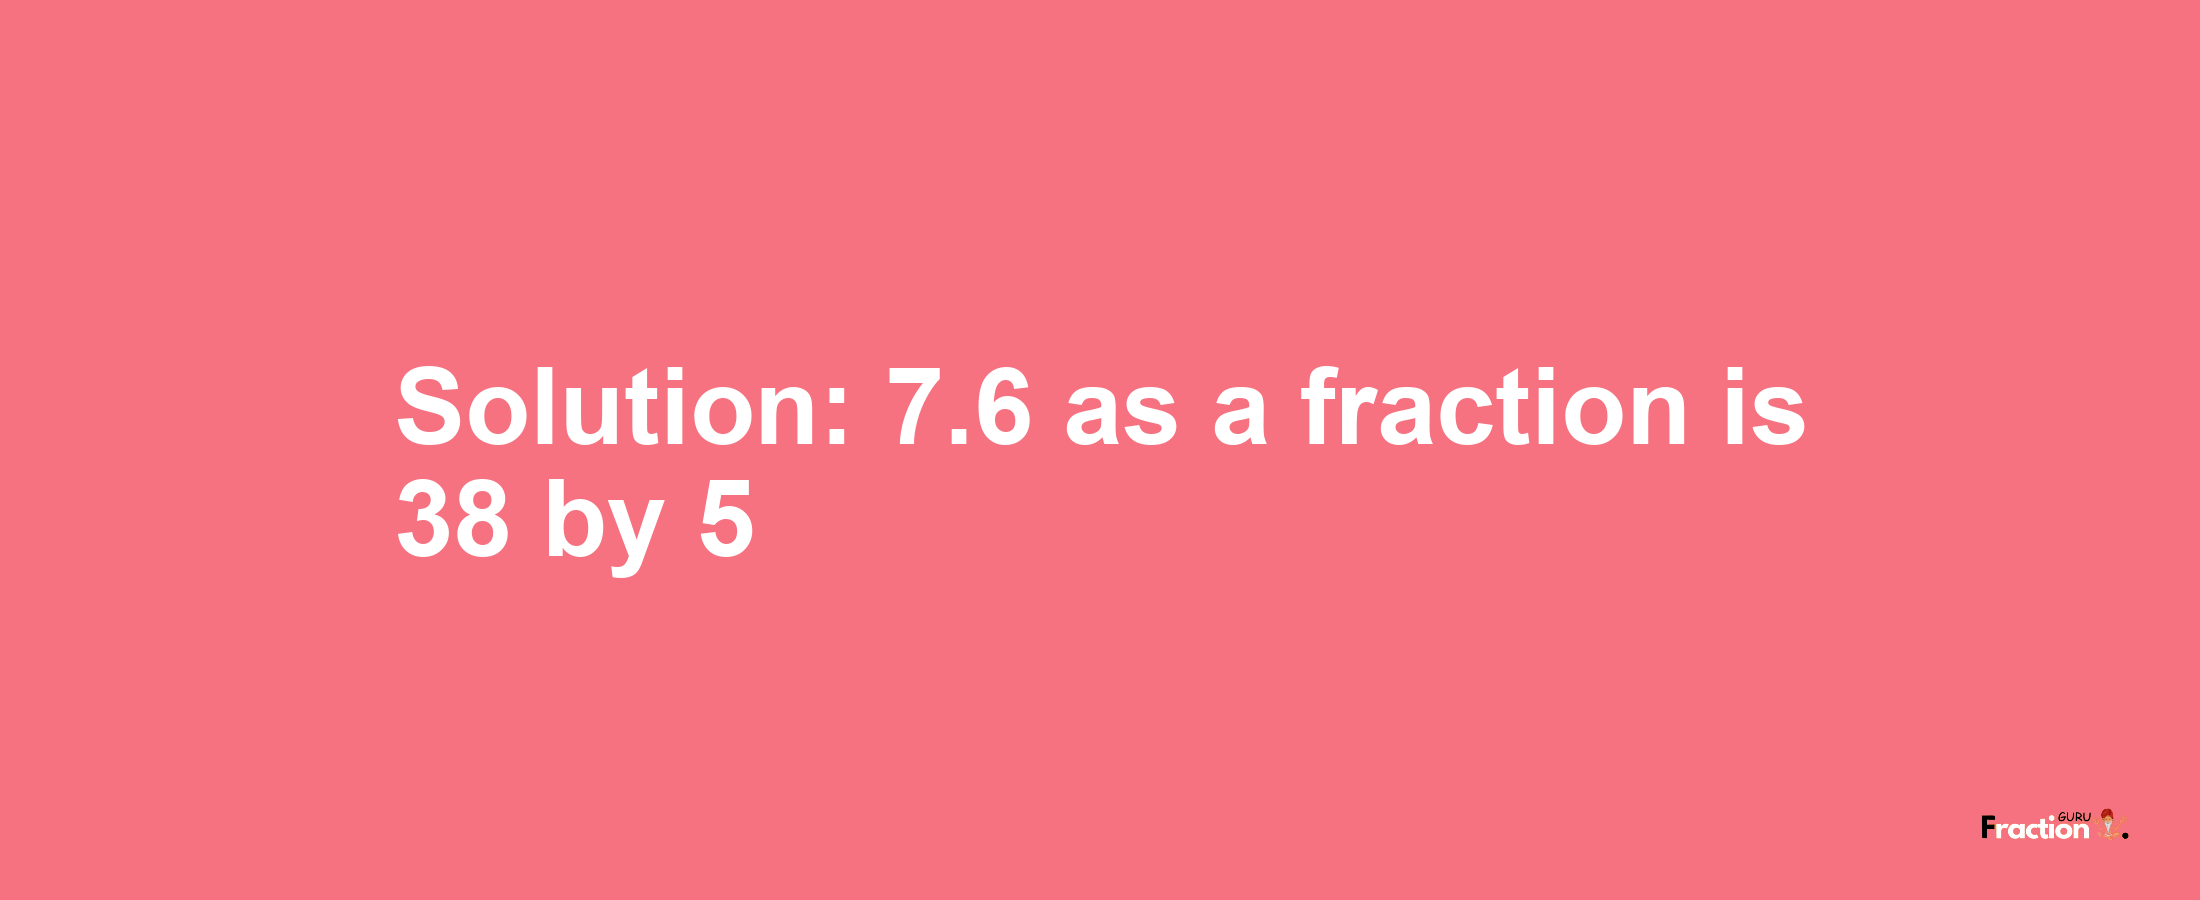 Solution:7.6 as a fraction is 38/5